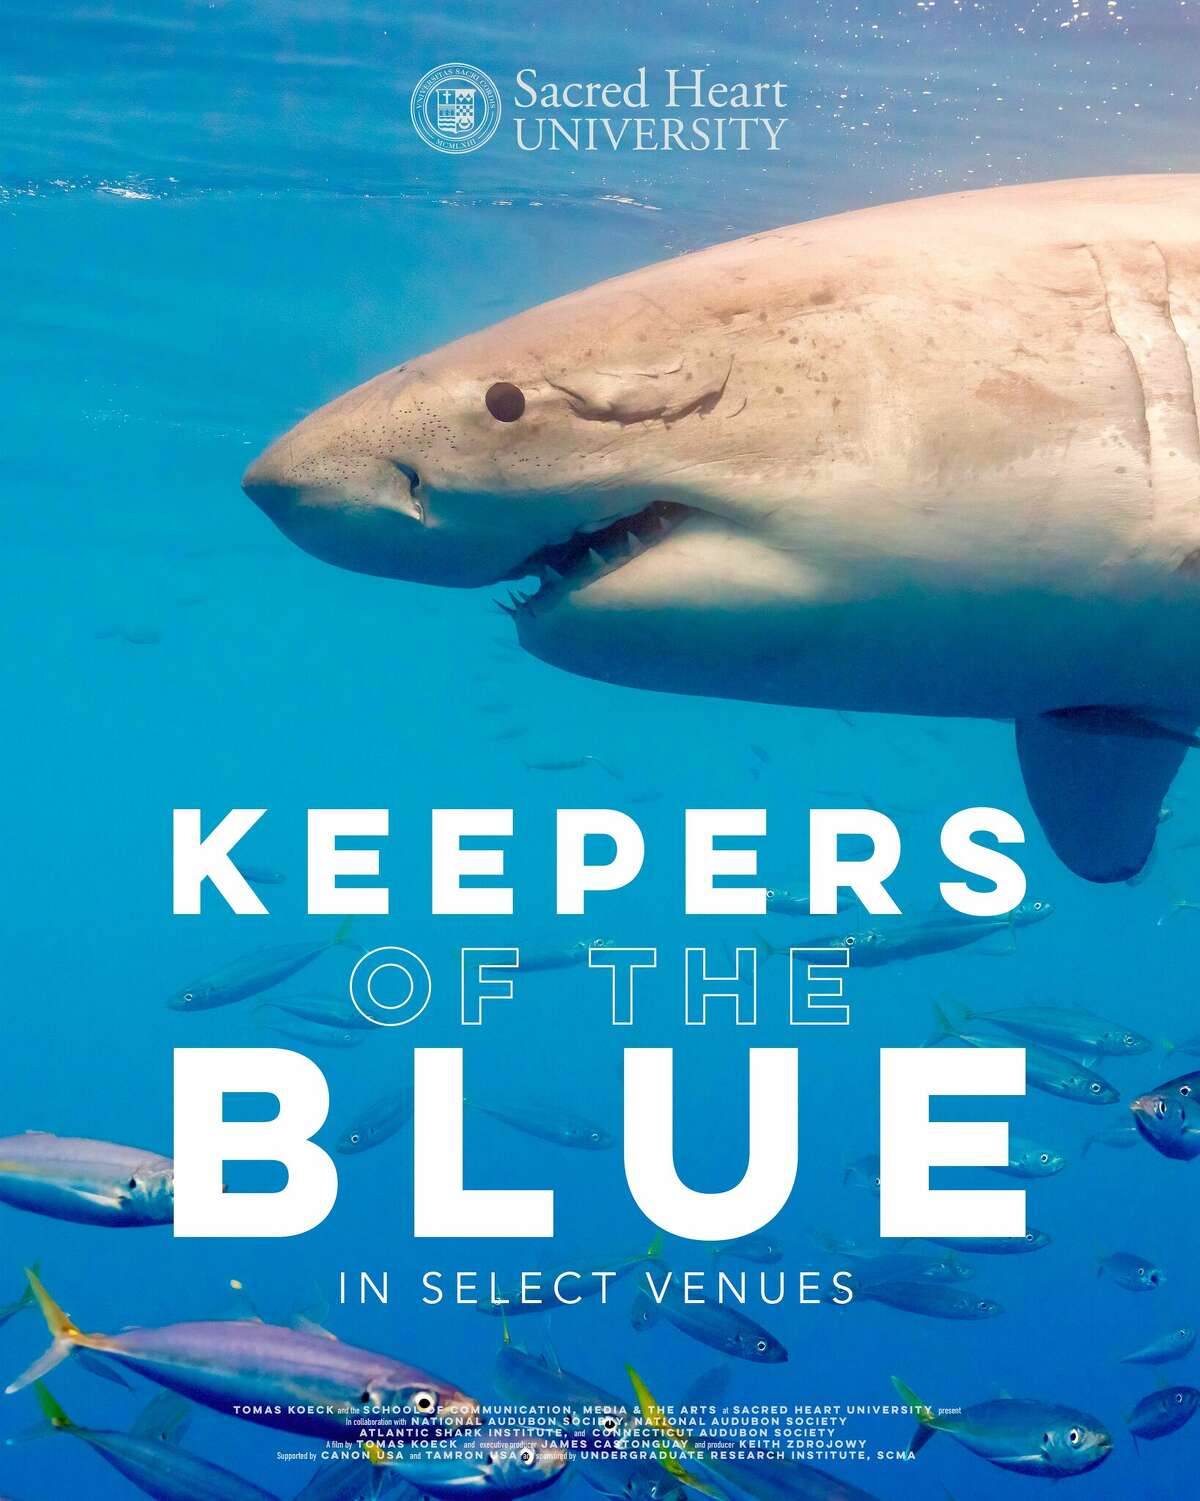 "Keepers of the Blue" is a new nature documentary by Sacred Heart University student Tomas Koeck. The film gives an ecological overview of different oceanic and aquatic environments.